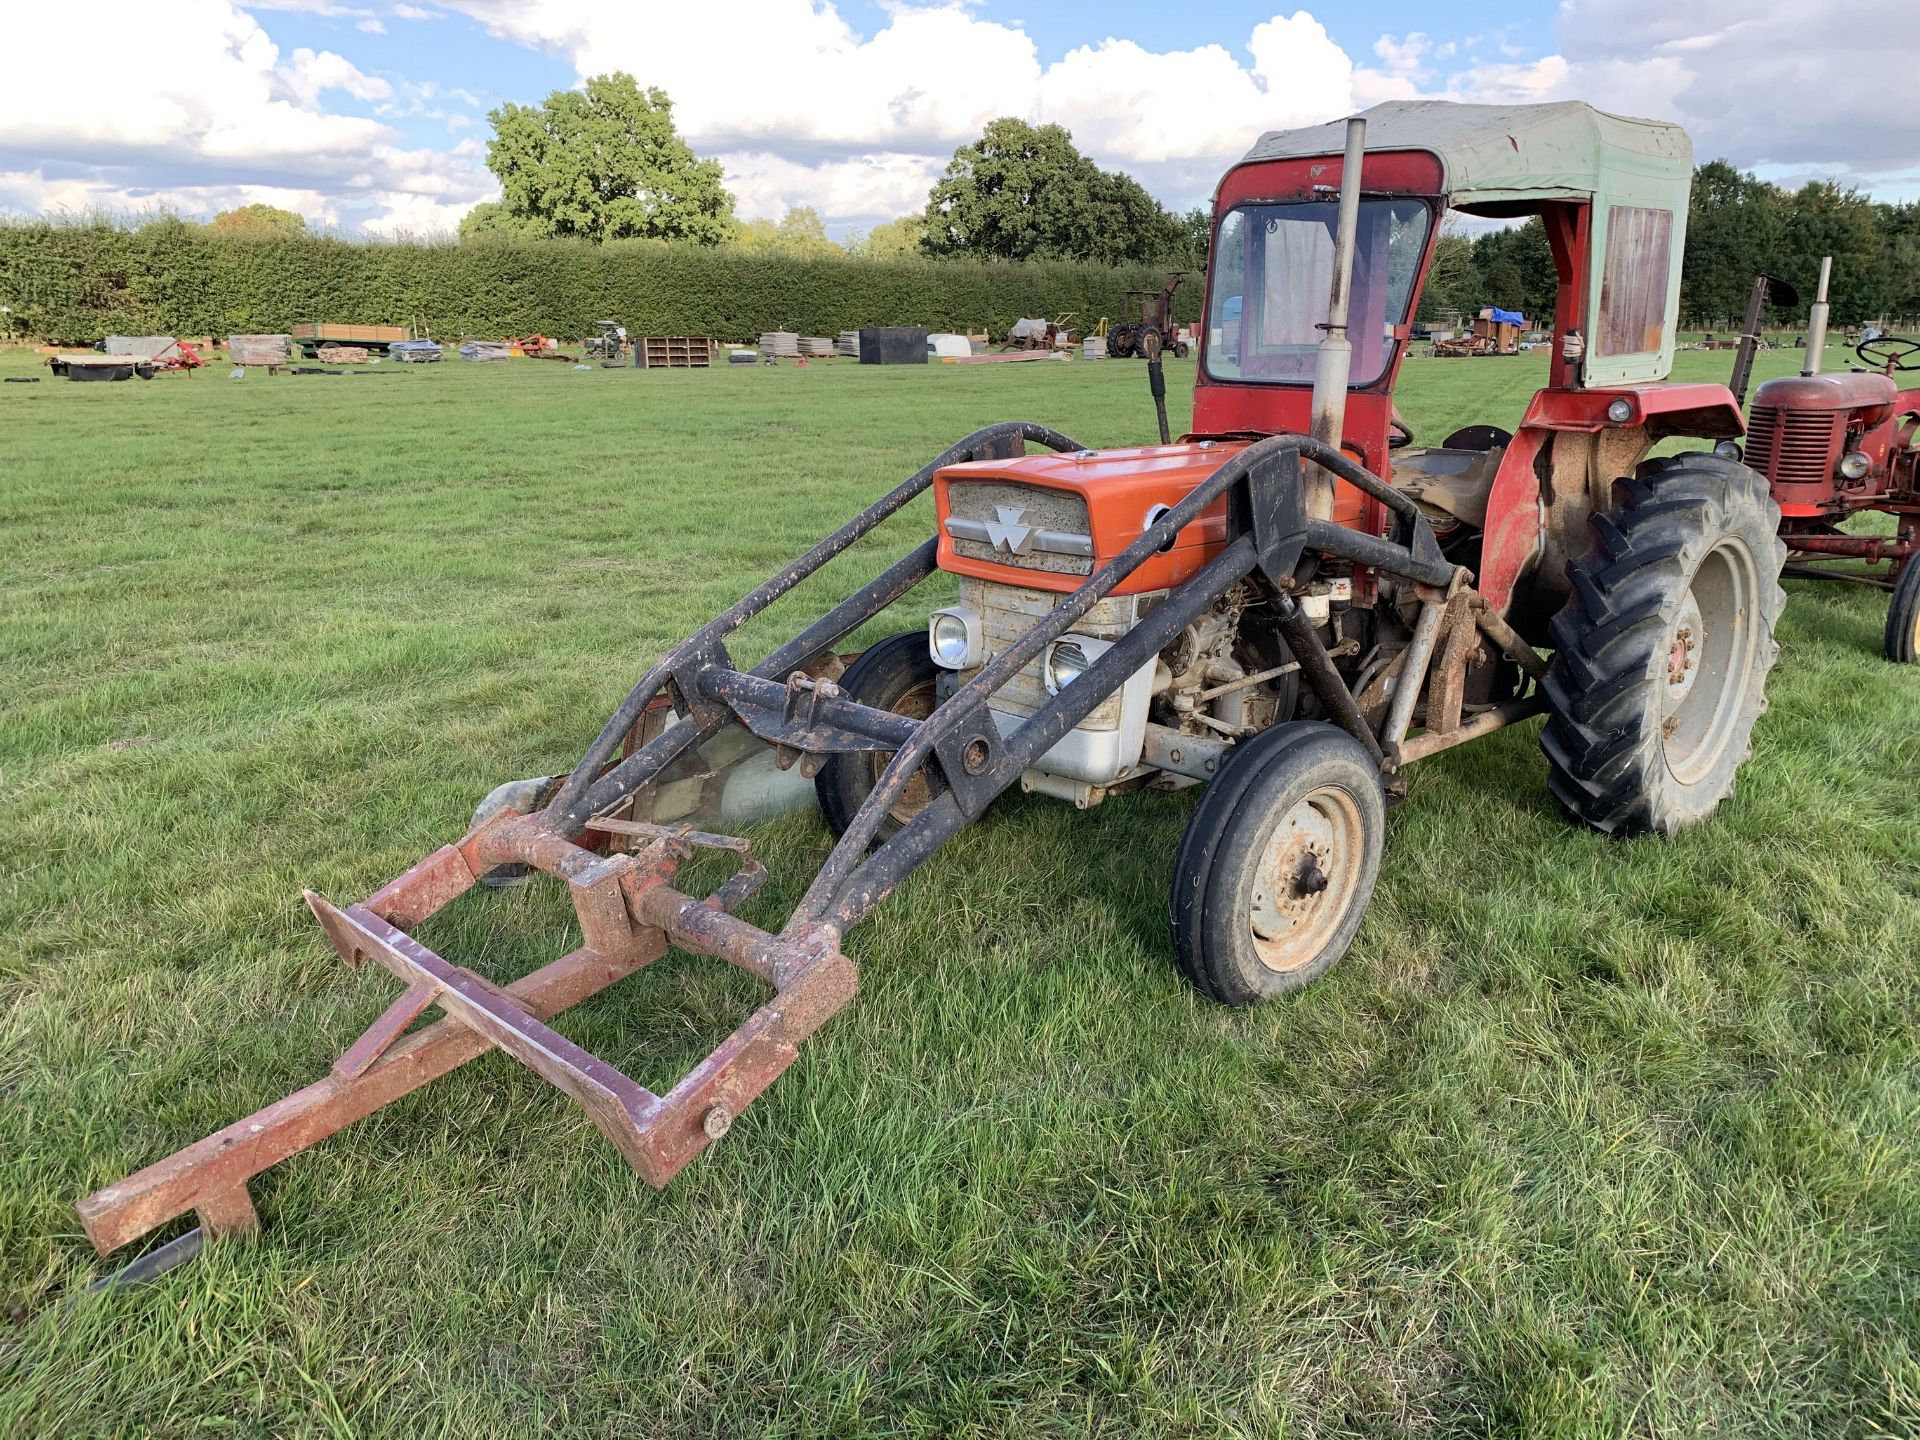 Massey Ferguson 135 tractor with loader & cab, TPY 301H, 5172hrs indicated, 1 owner from new, comes